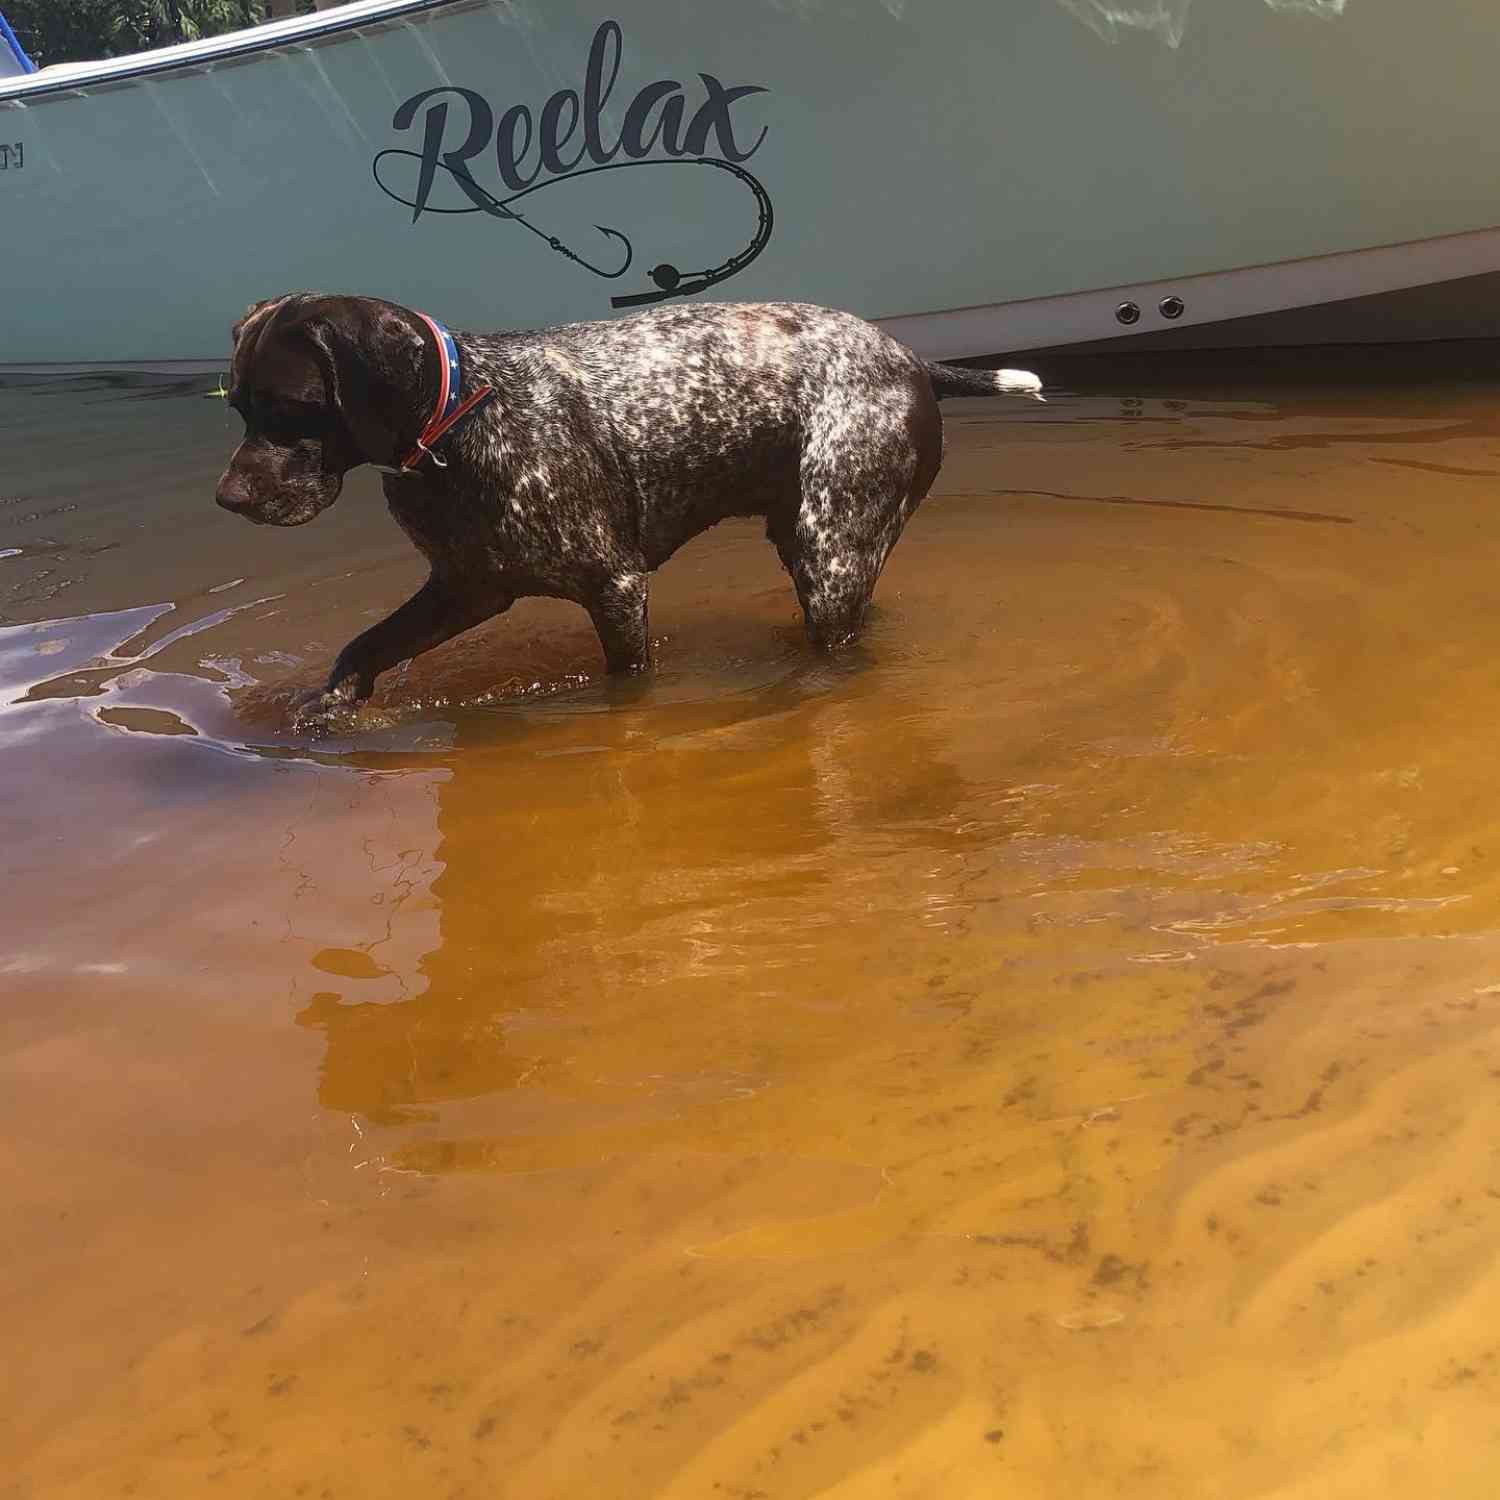 Title: Wrigley loves to Relax on his Sportsman - On board their Sportsman Open 242 Center Console - Location: Ms Gulf Coast. Participating in the Photo Contest #SportsmanMarch2021